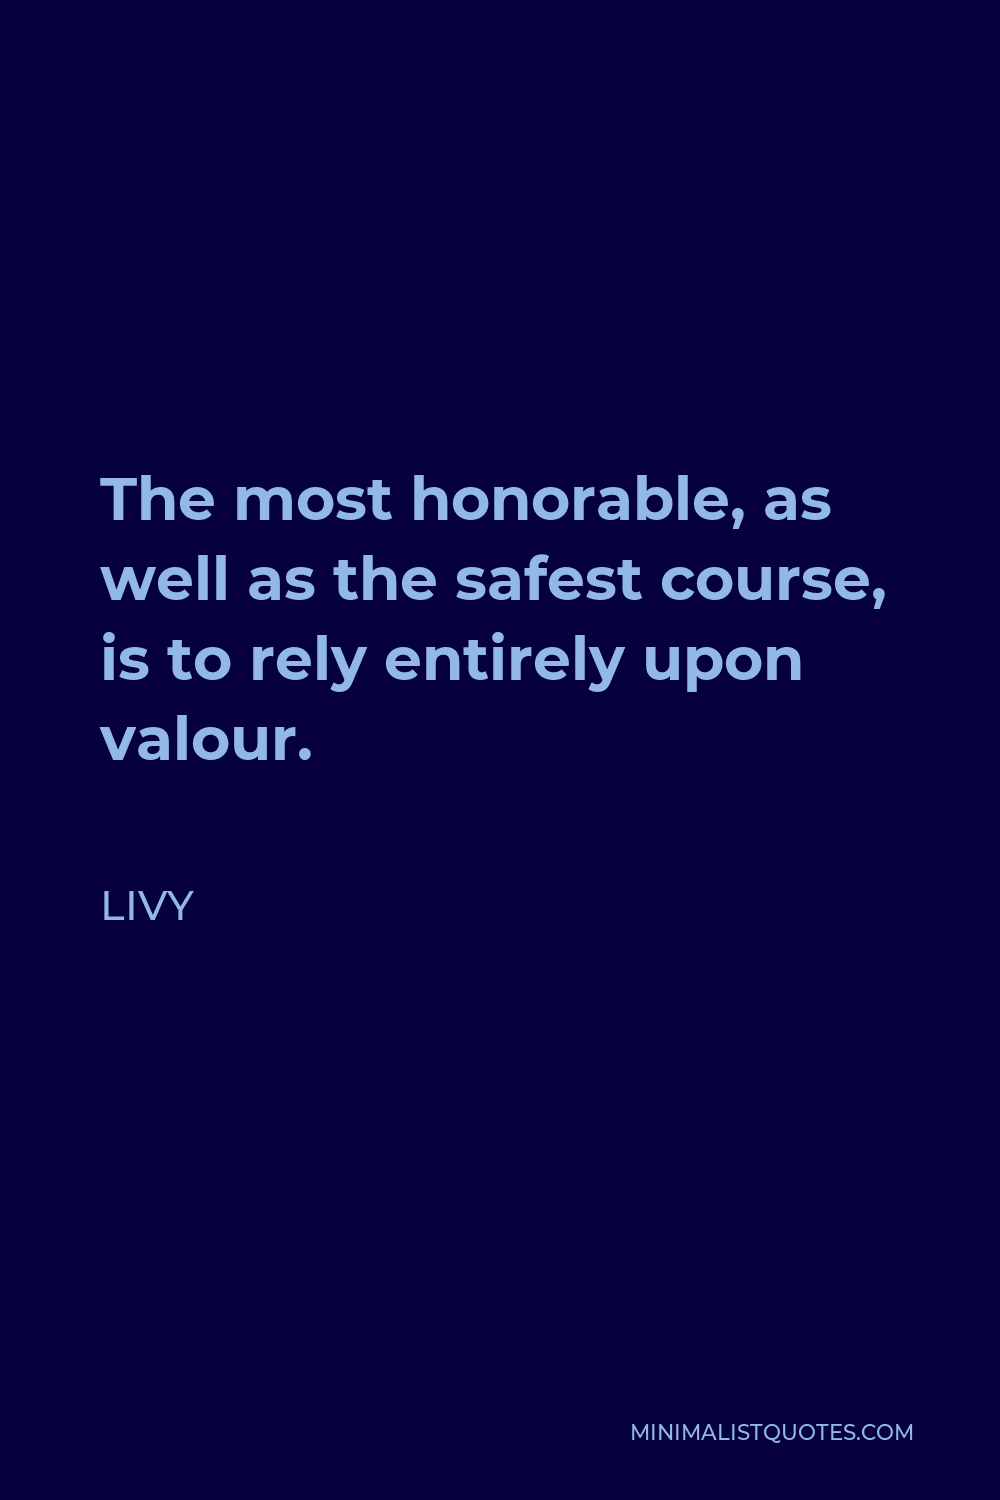 Livy Quote - The most honorable, as well as the safest course, is to rely entirely upon valour.